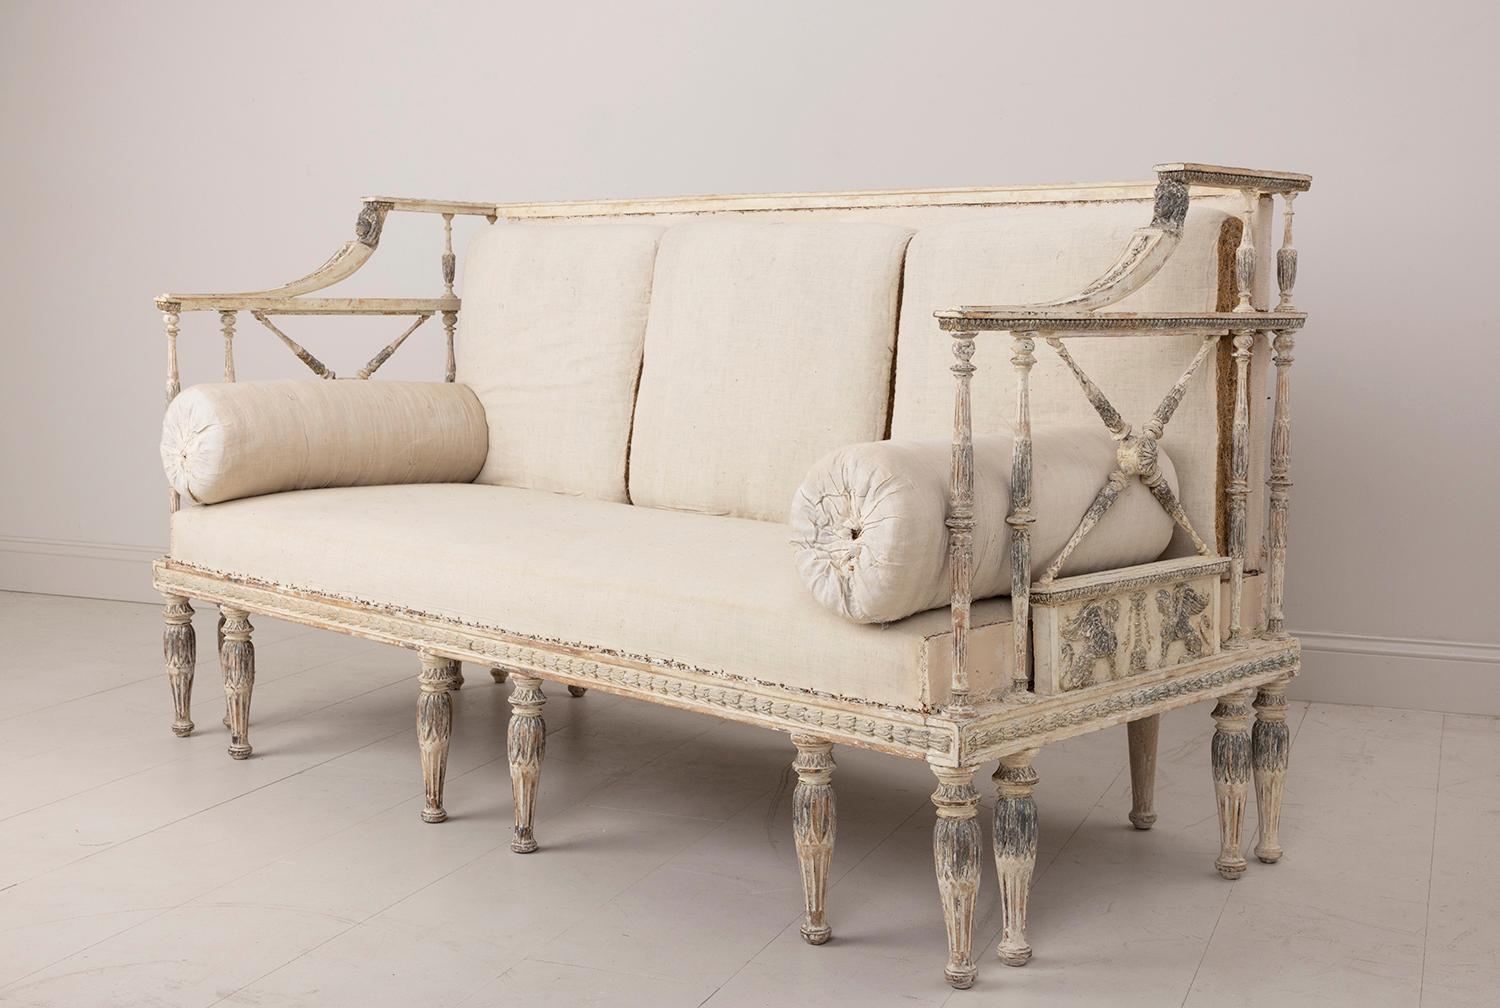 A rare 19th c. Swedish sofa from the Gustavian period hand-scraped to its beautiful, original paint with original cushions. Fine carvings, ca 1800, Stockholm, Sweden. This piece features decoratively carved detailing of bell flowers around the frame